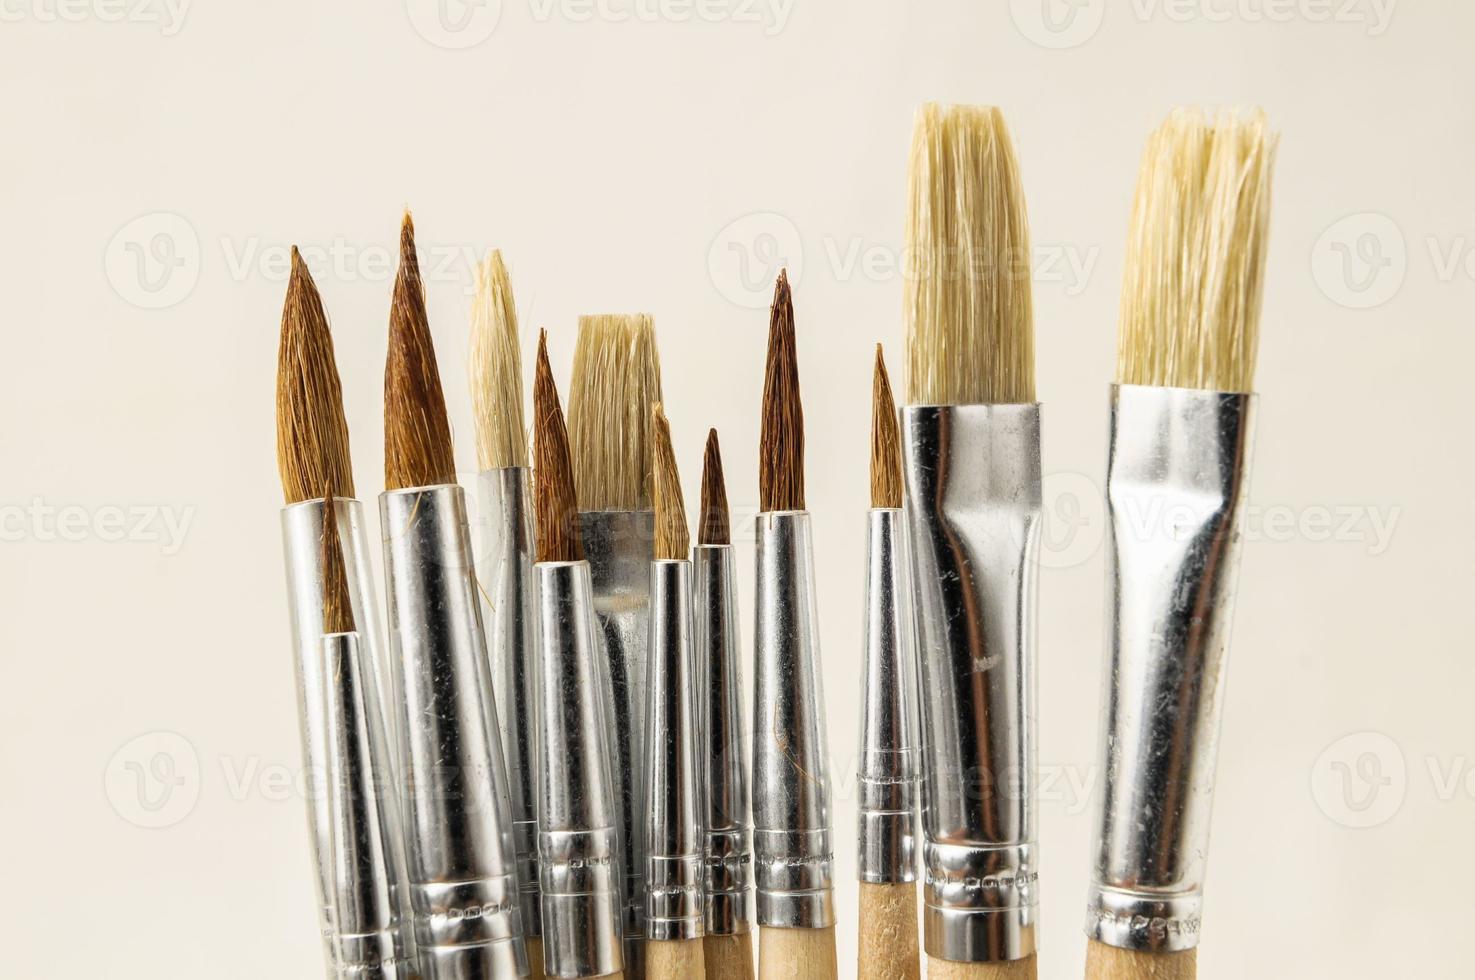 New Wooden Different Paintbrush Texture photo